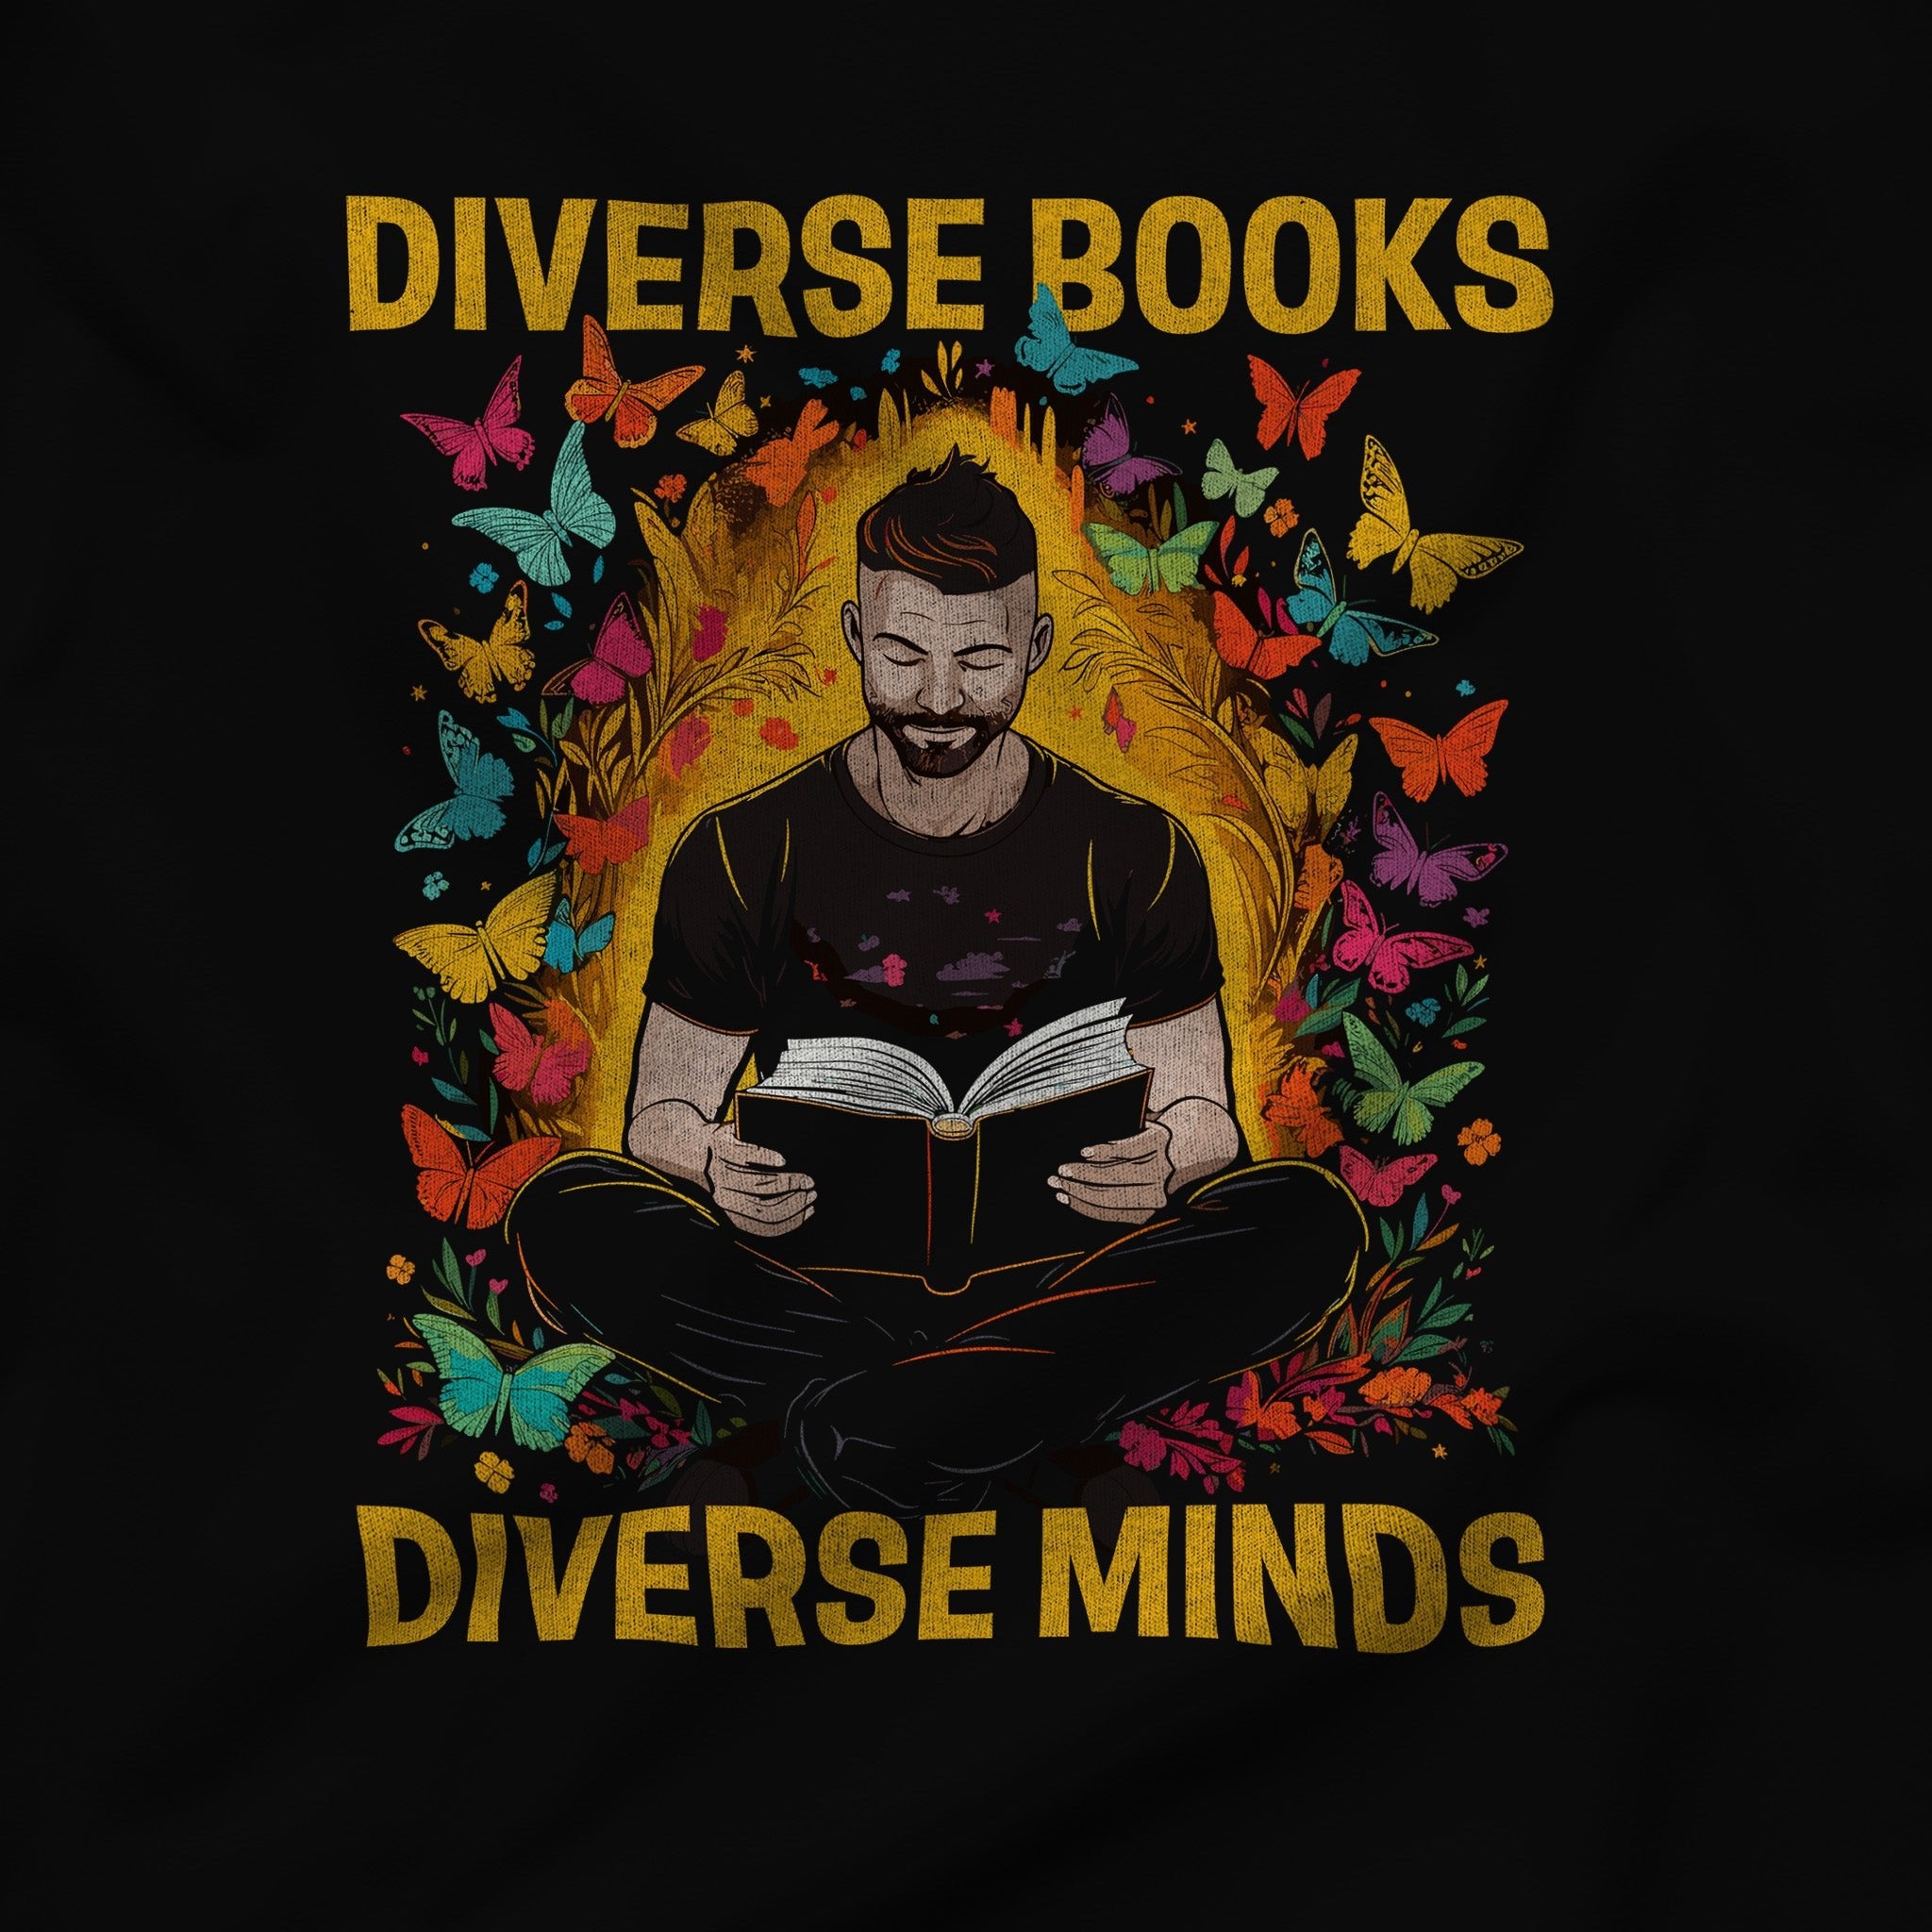 "Diverse Books, Diverse Minds" Graphic Sweatshirt - Hunky Tops